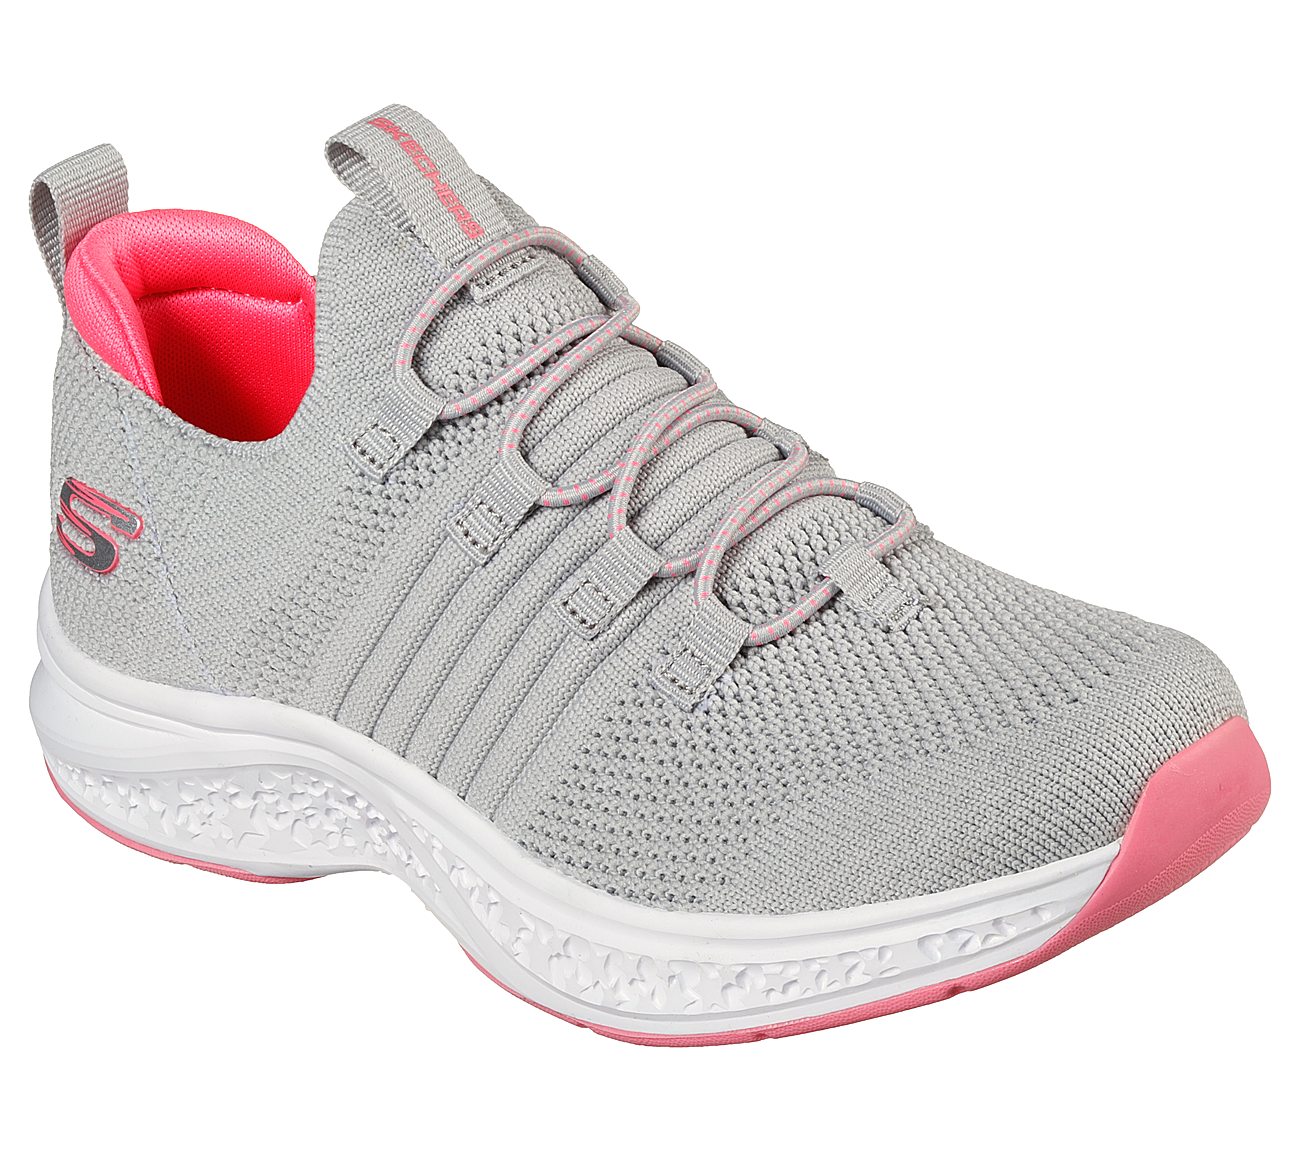 STAR SPEEDER - BRIGHT FORCE, GREY/HOT PINK Footwear Lateral View